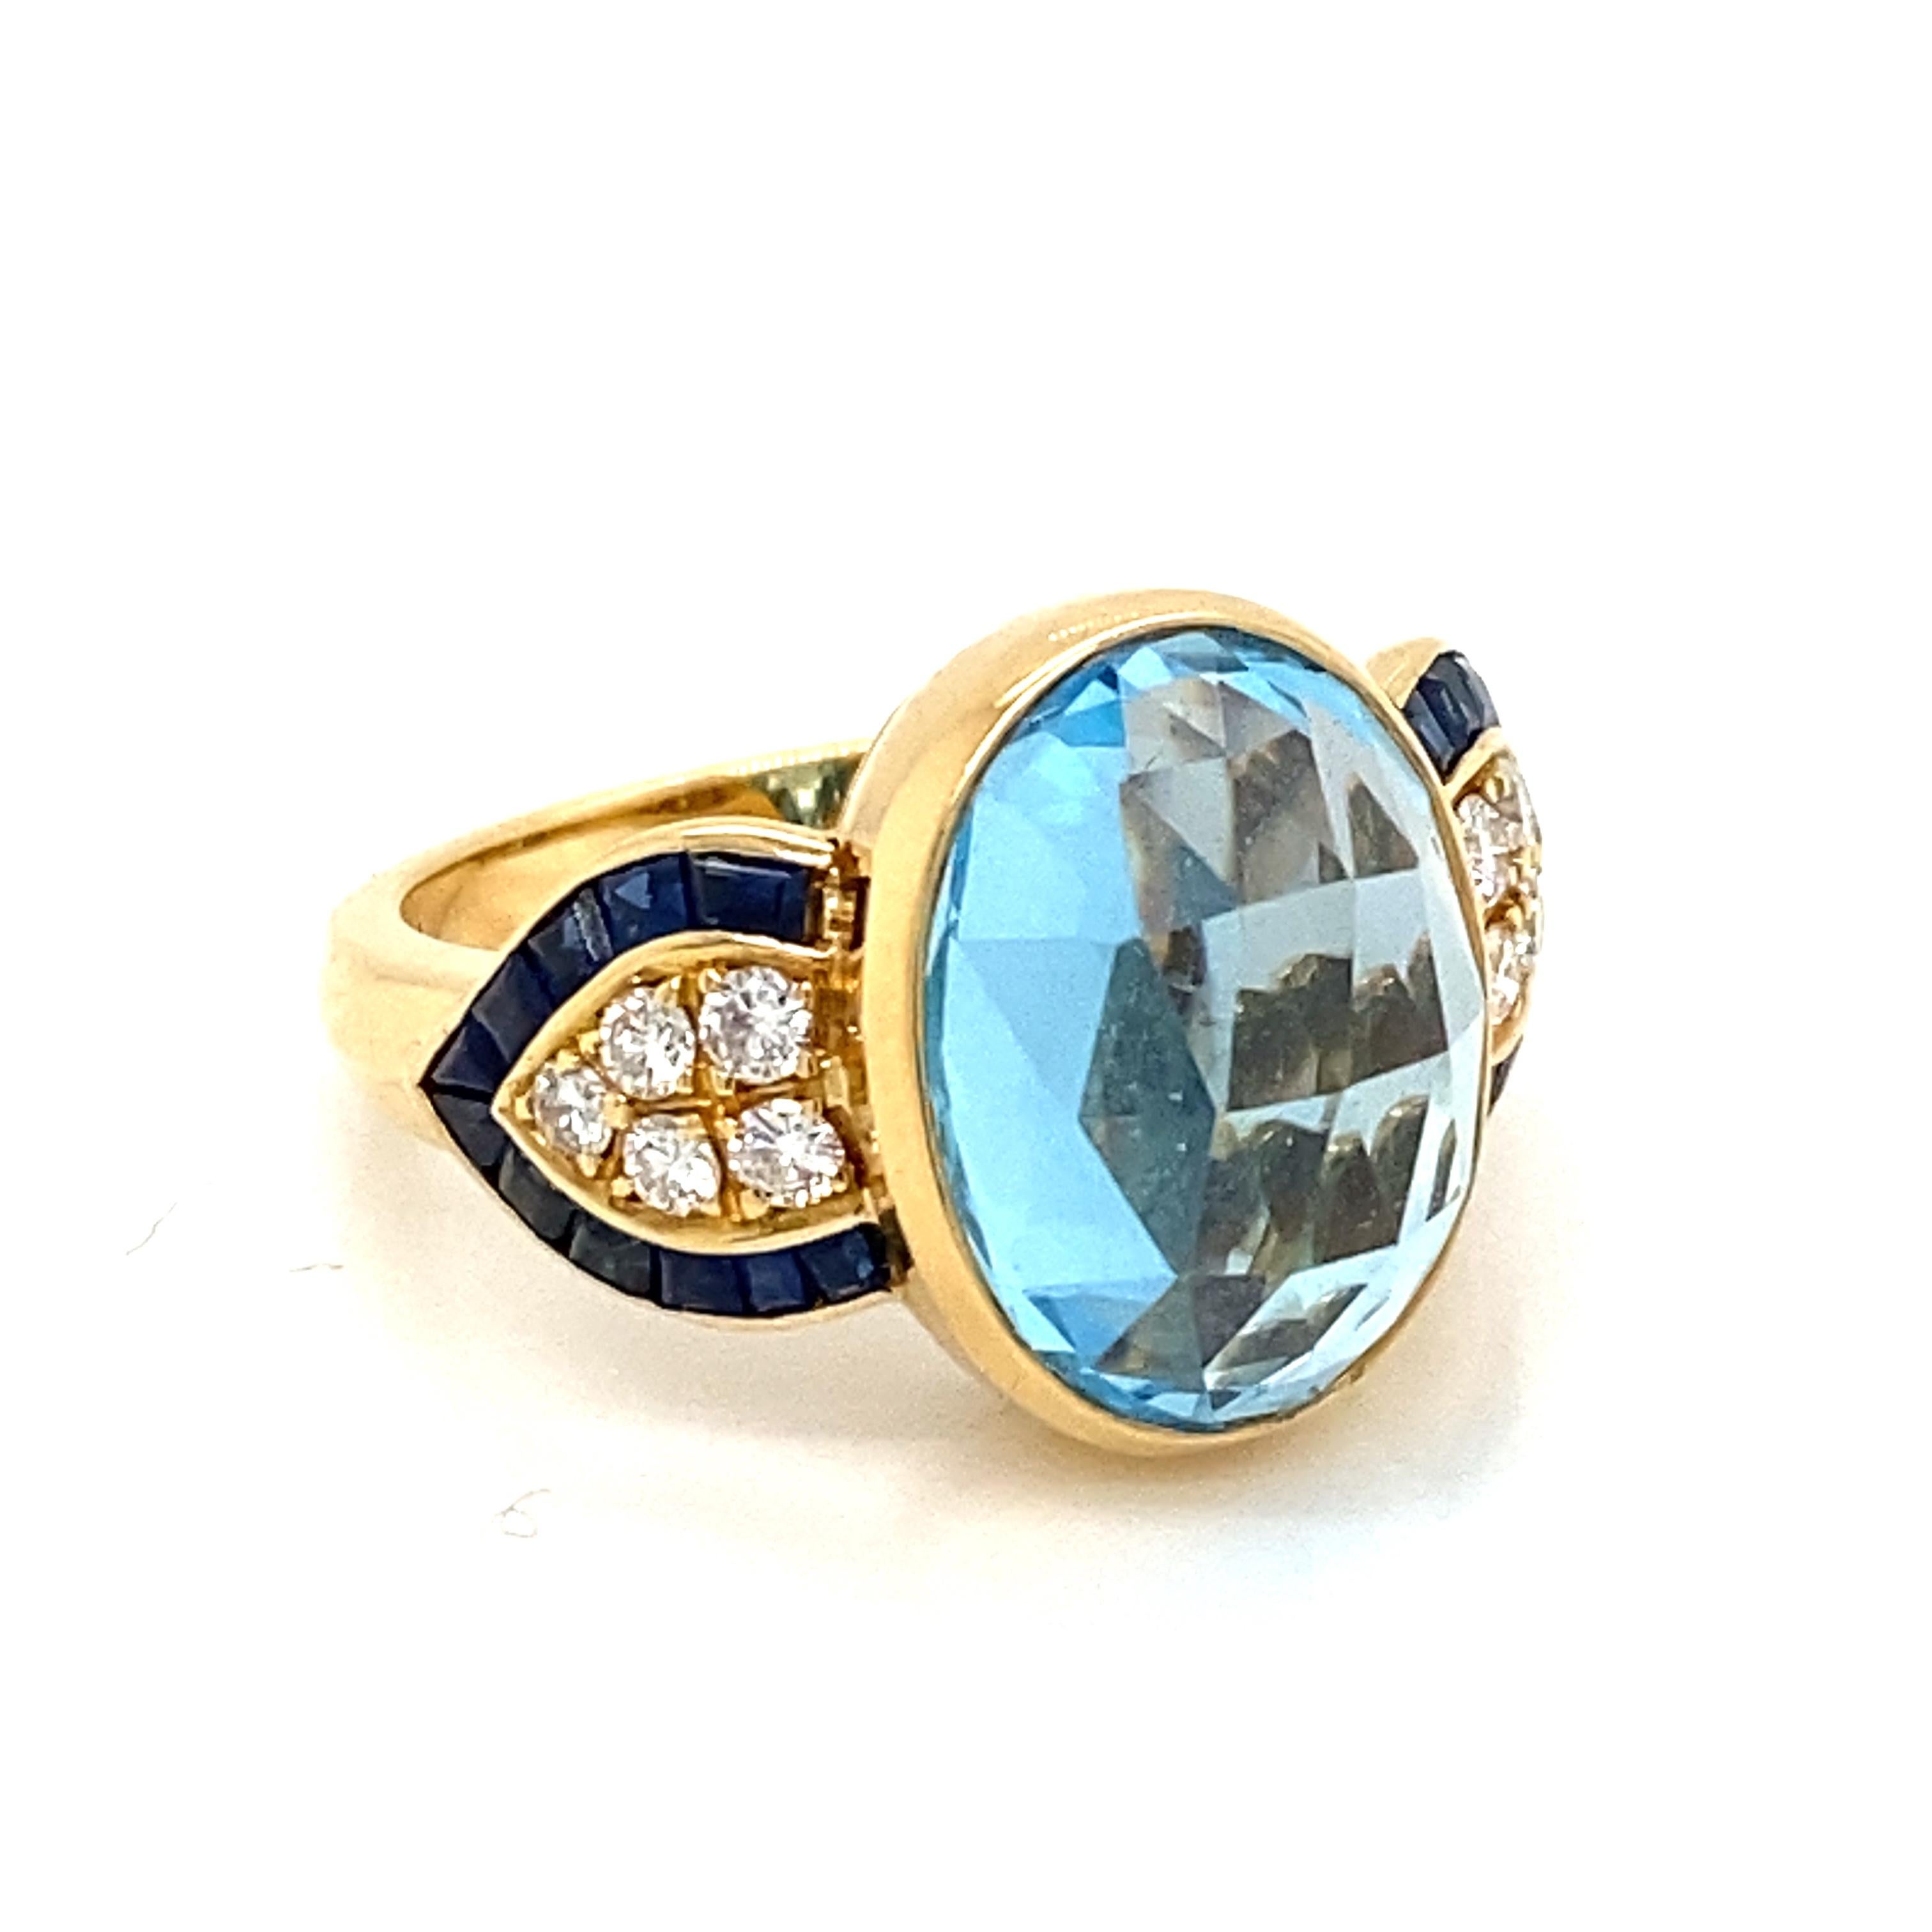 Illario iconic flower design ring, made in Italy, circa 1970'. Ring handcrafted in 18K yellow Gold, feature in the center a large and sparkling Blue Topaz, Natural sapphire custom cut and Pavé Diamonds. 

Metal: Polished 18K yellow gold
Diamonds: 1